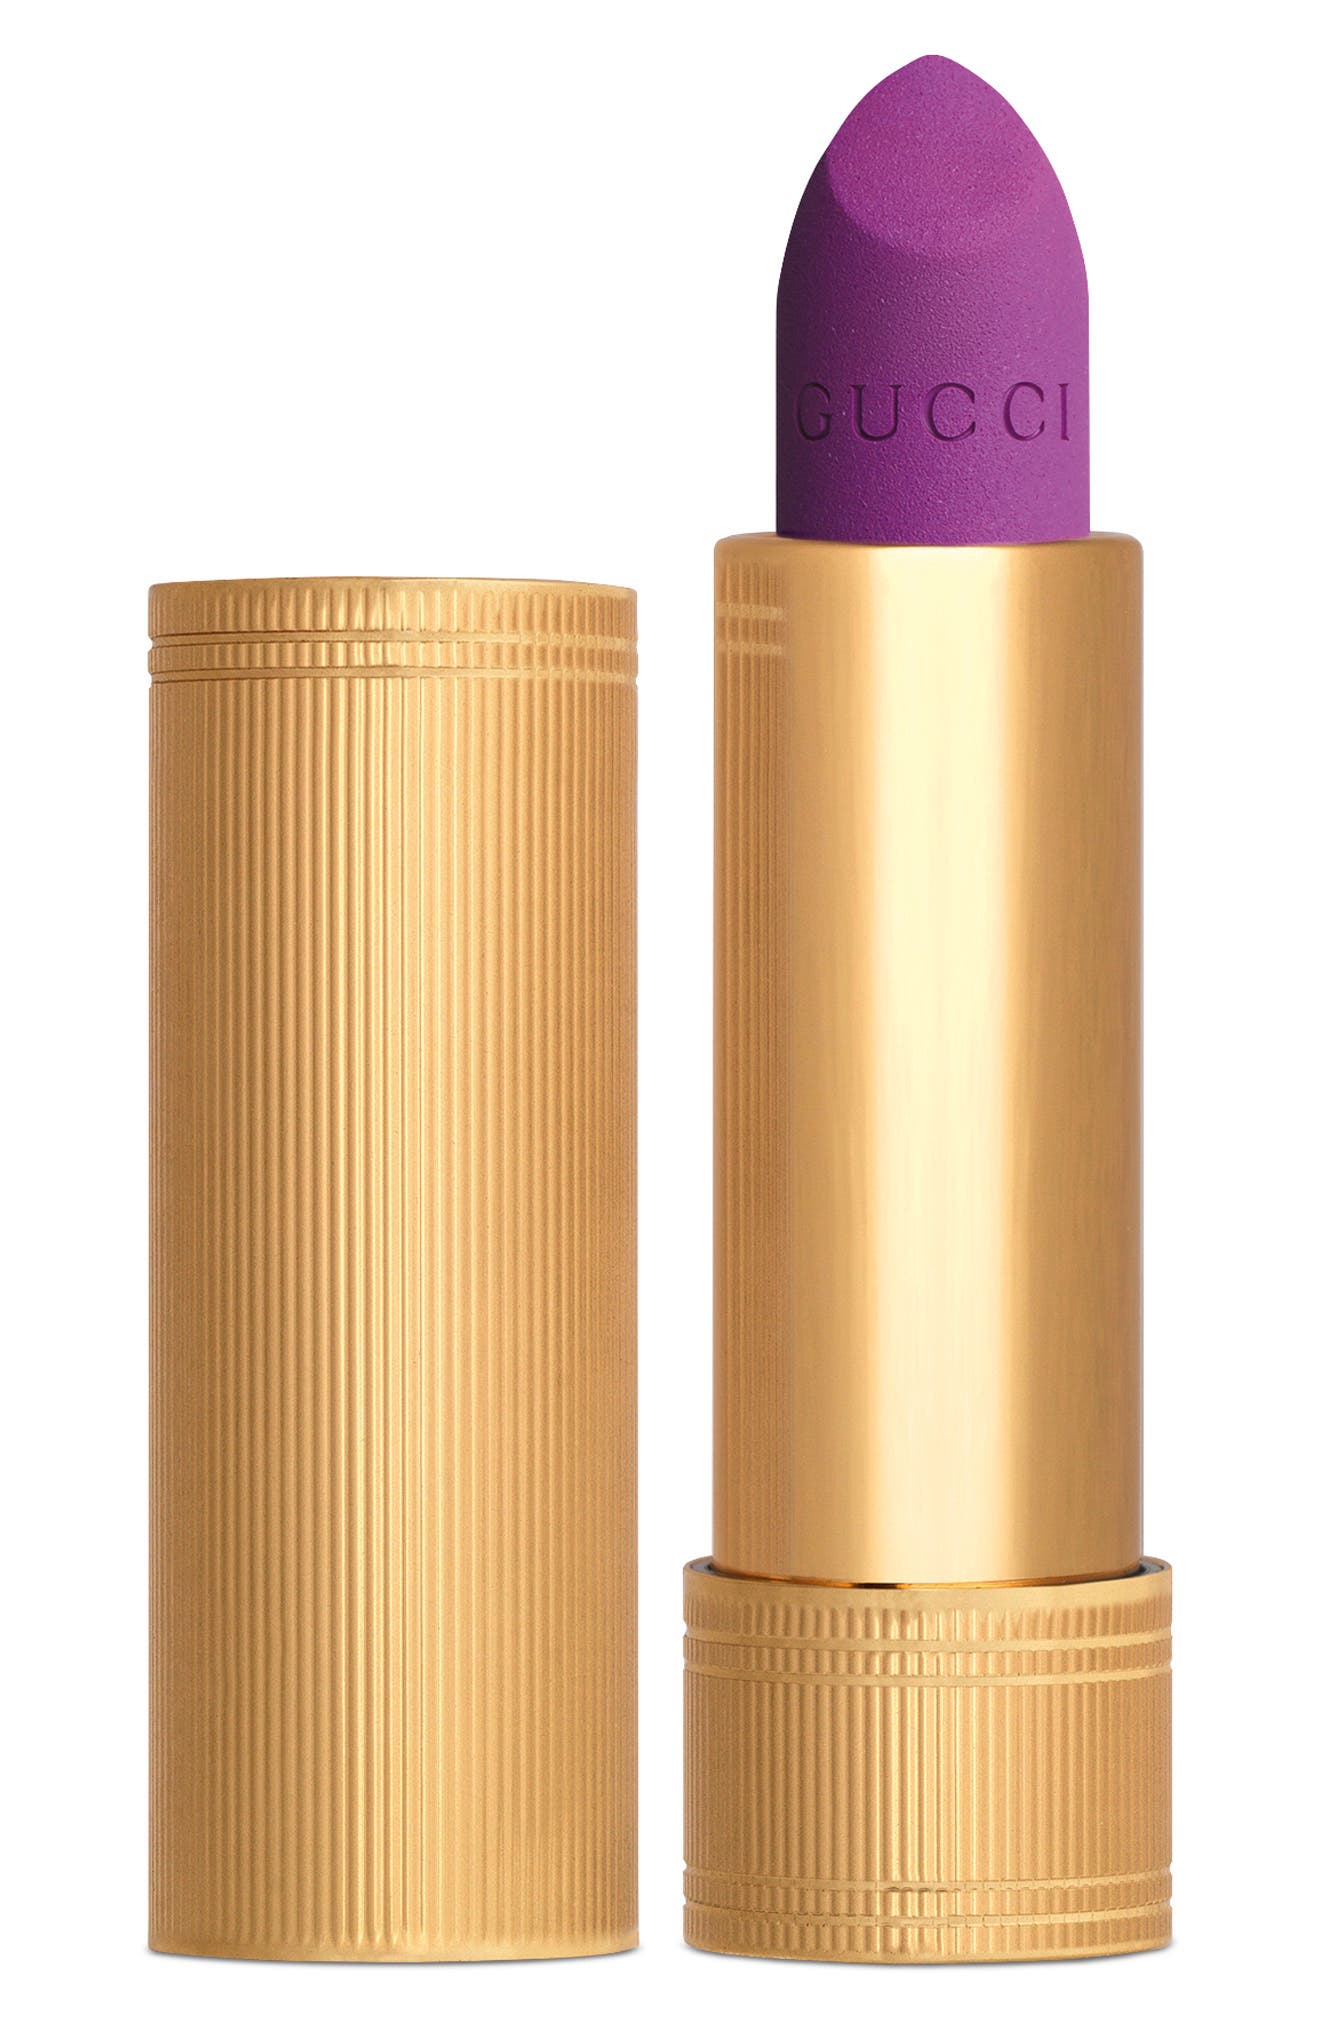 Gucci Rouge a Levres Mat Matte Lipstick in 702 Anne Lilac at Nordstrom